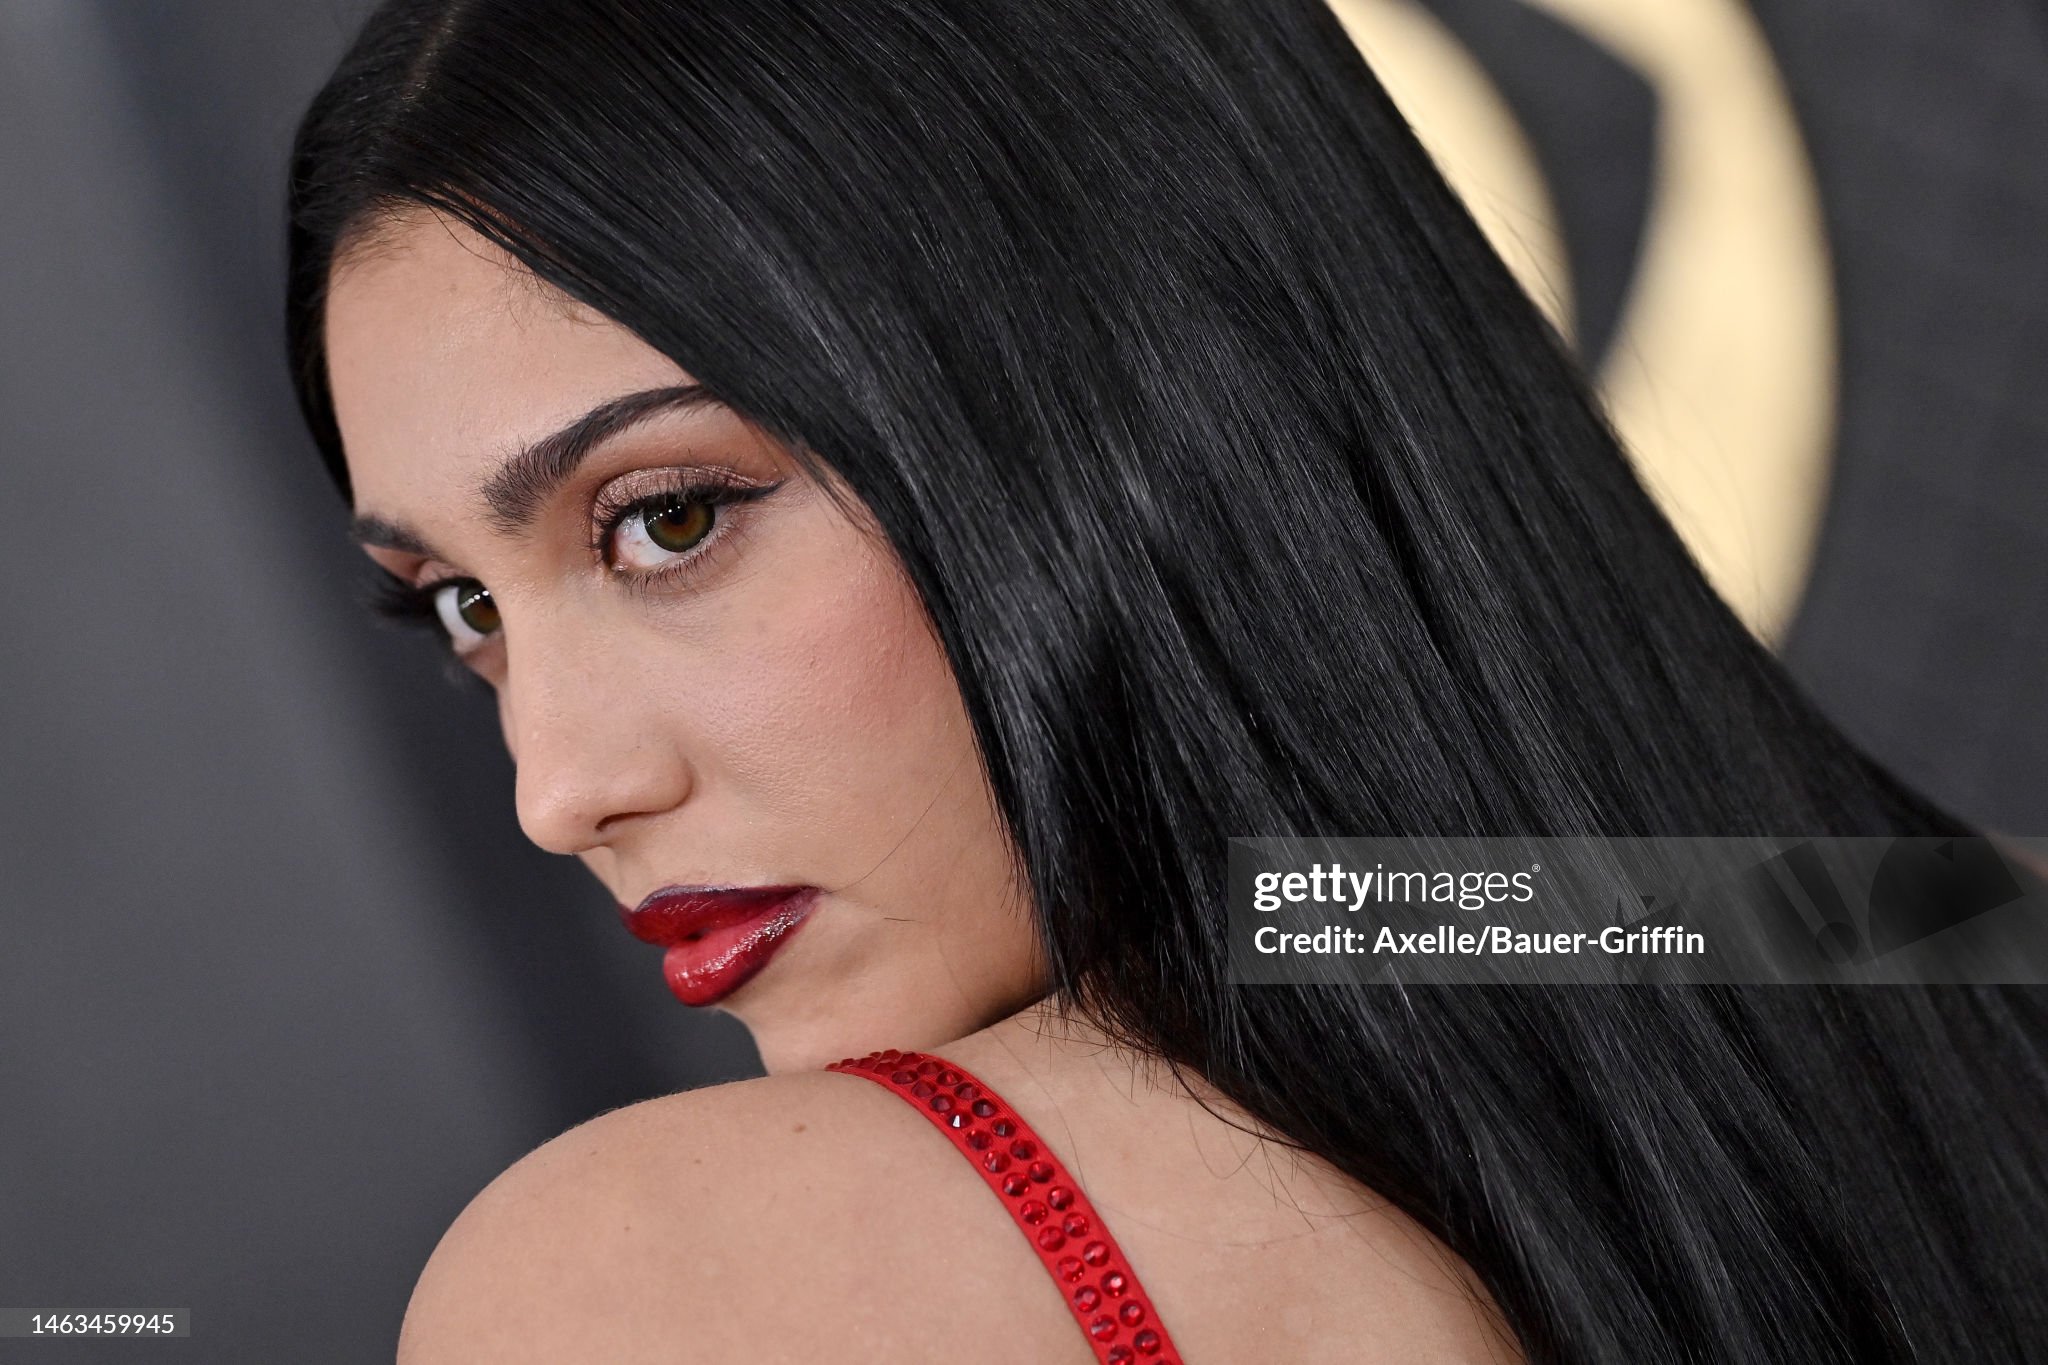 Lourdes leon From the 65th Annual GRAMMY Awards